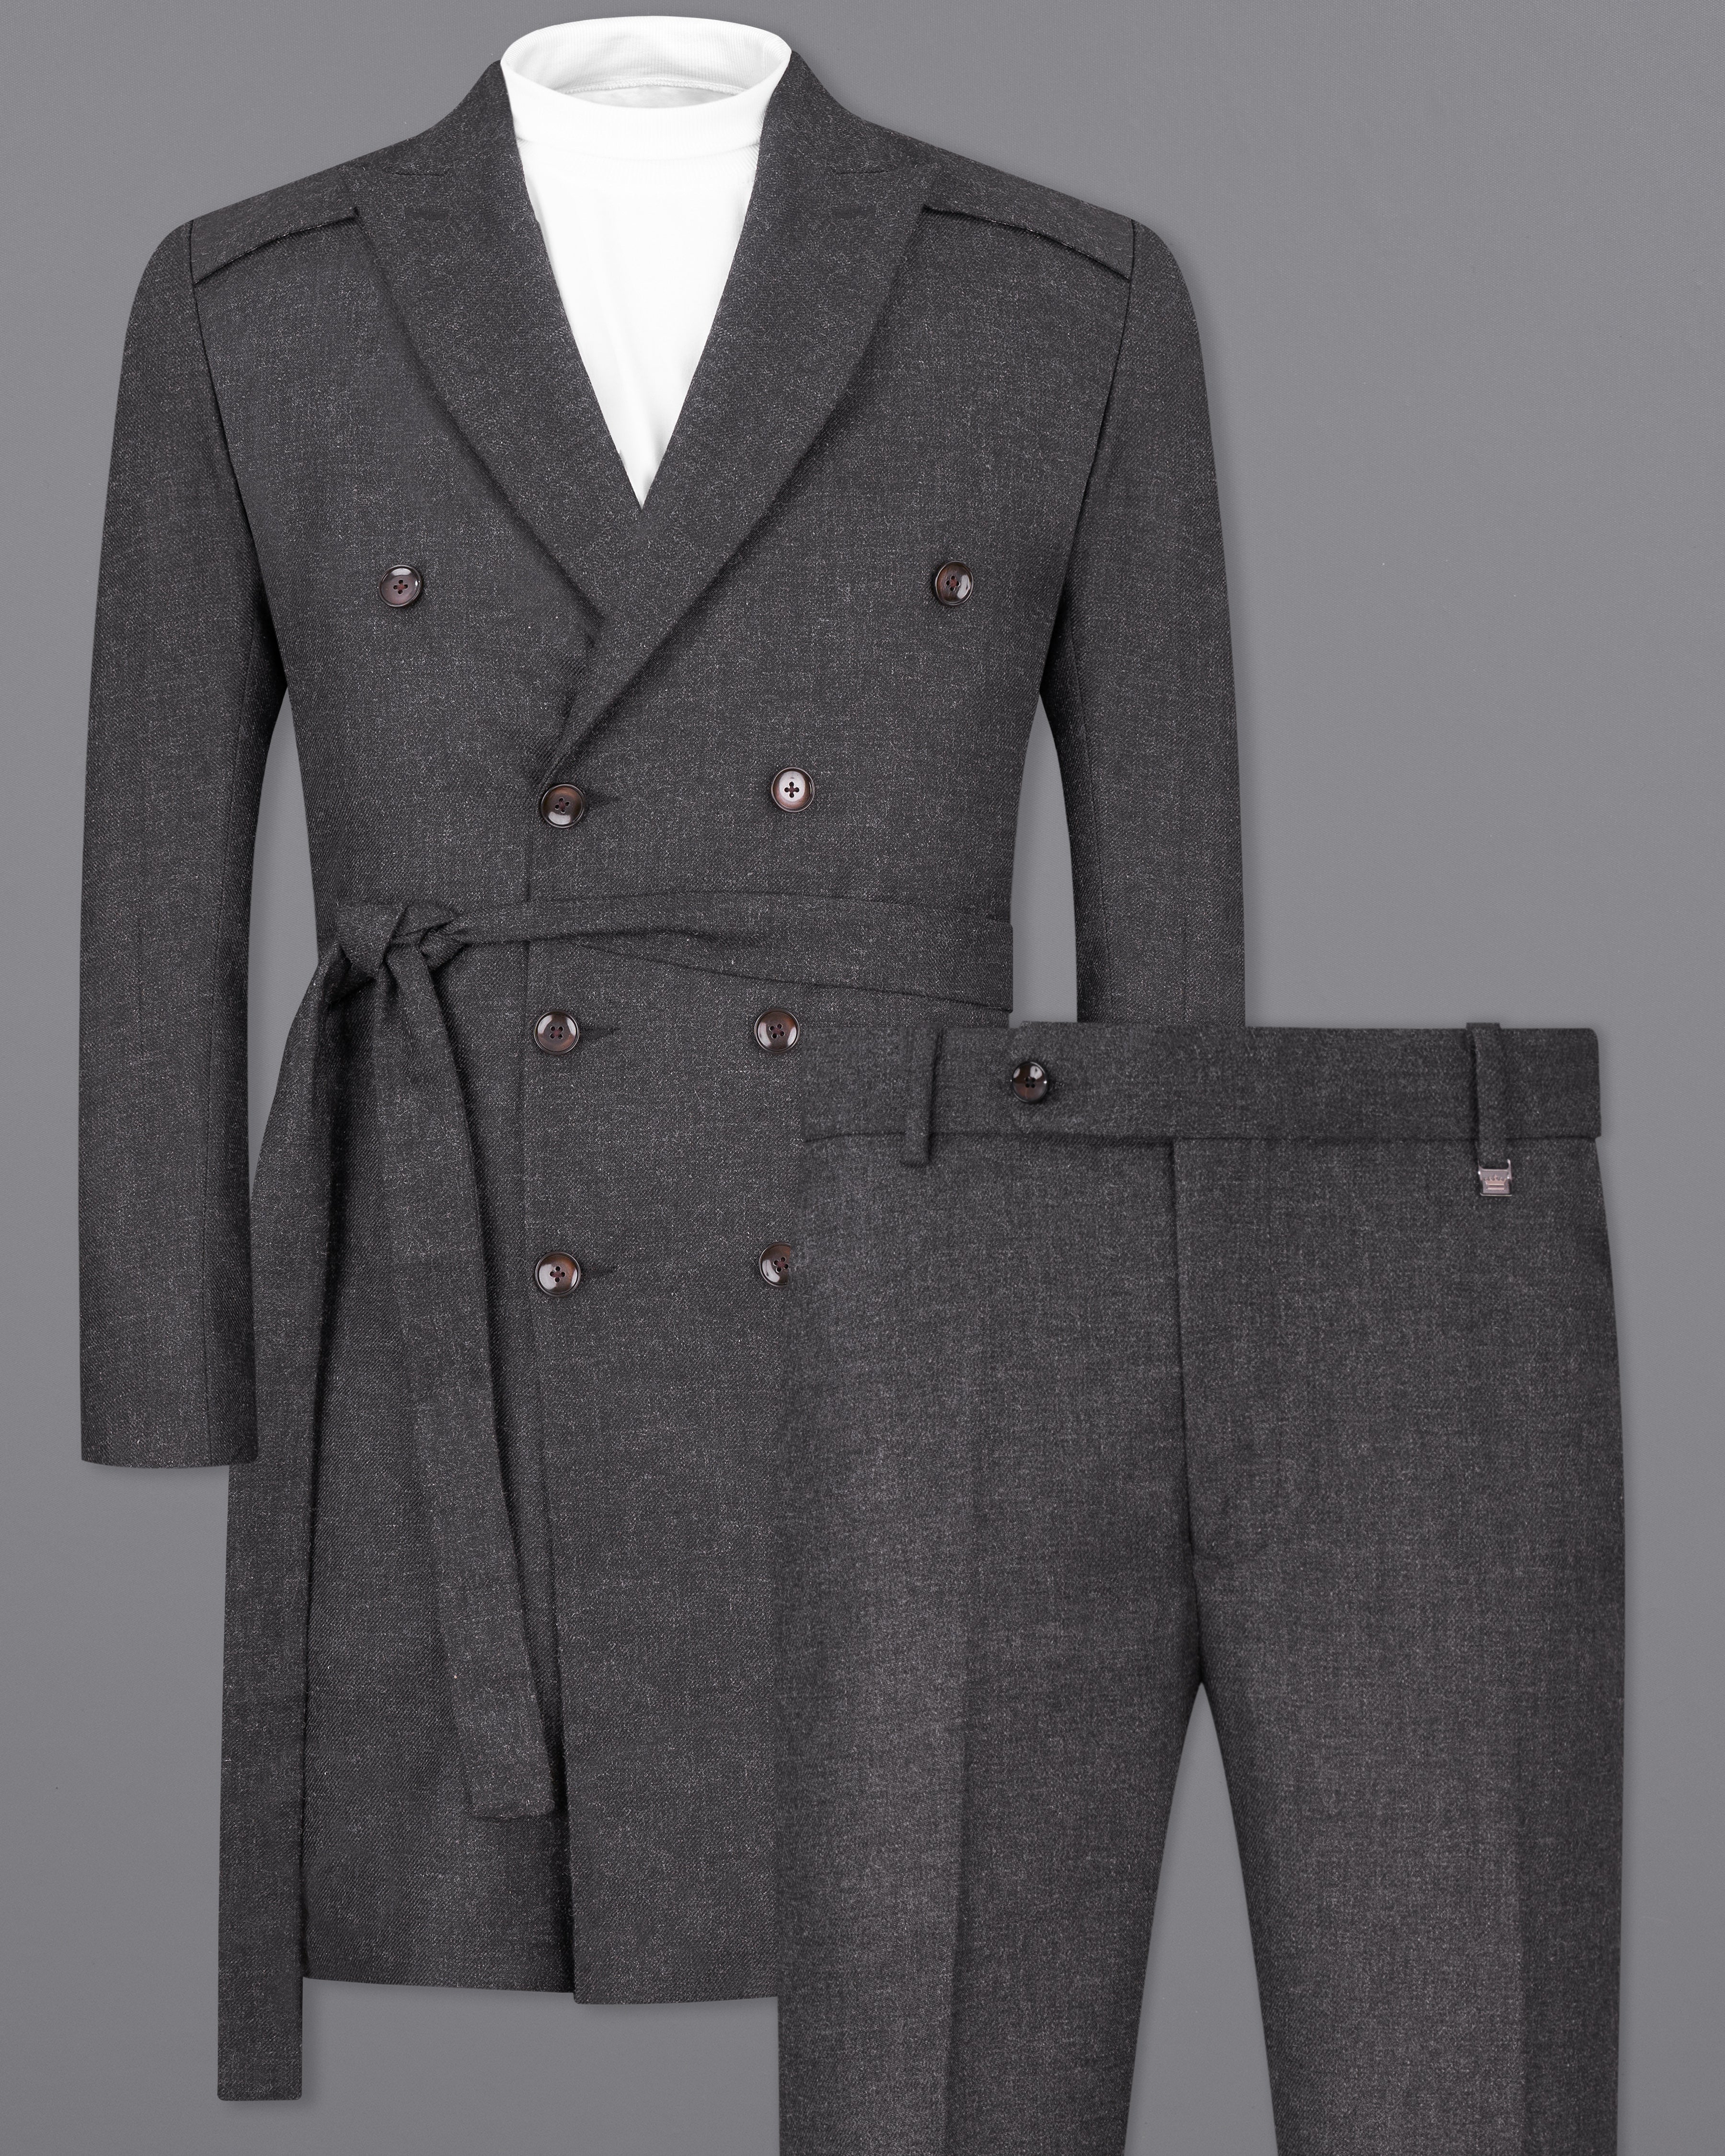 Iridium Gray Wool Rich Double Breasted Trench Coat with Pants TCPT2529-DB-D35-36, TCPT2529-DB-D35-38, TCPT2529-DB-D35-40, TCPT2529-DB-D35-42, TCPT2529-DB-D35-44, TCPT2529-DB-D35-46, TCPT2529-DB-D35-48, TCPT2529-DB-D35-50, TCPT2529-DB-D35-T2, TCPT2529-DB-D35-54, TCPT2529-DB-D35-56, TCPT2529-DB-D35-58, TCPT2529-DB-D35-60